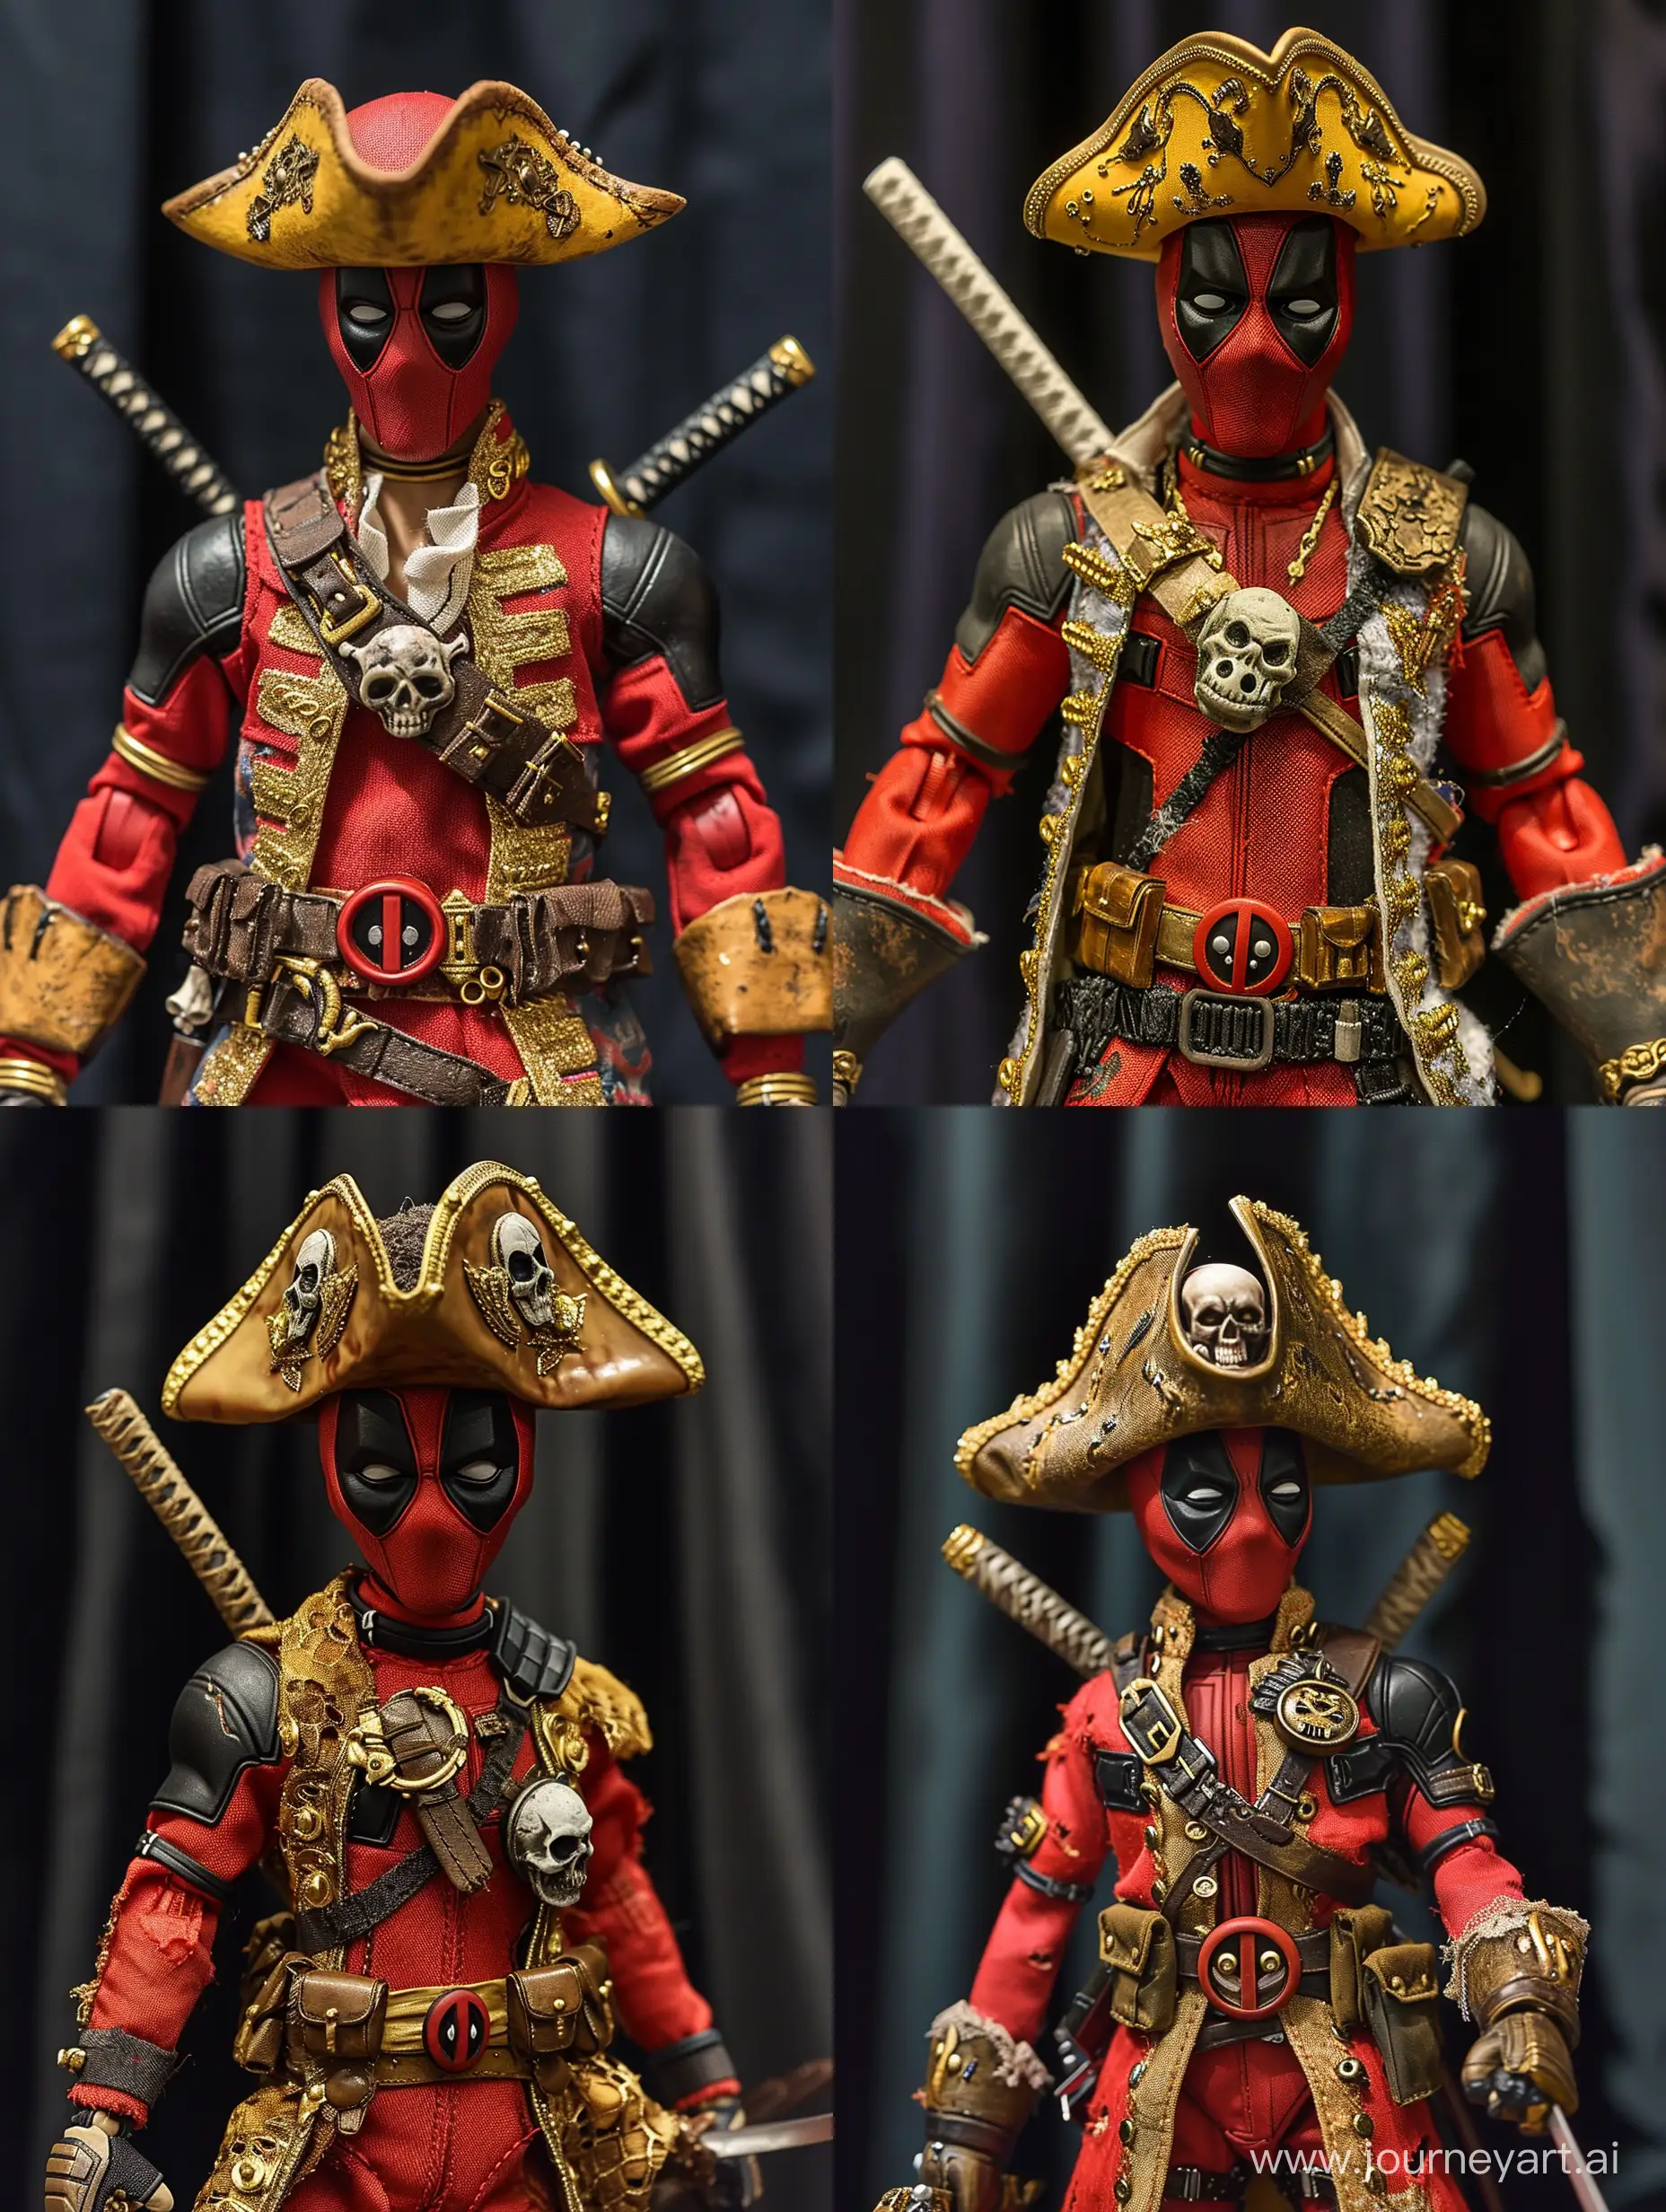 A figurine of Deadpool, the popular superhero, is dressed in a pirate costume. He wears a tricorn hat adorned with gold trim and a sword. His outfit includes a red coat with gold accents and a gold sash. He also wears a gold belt with a skull buckle. The background is a black curtain.